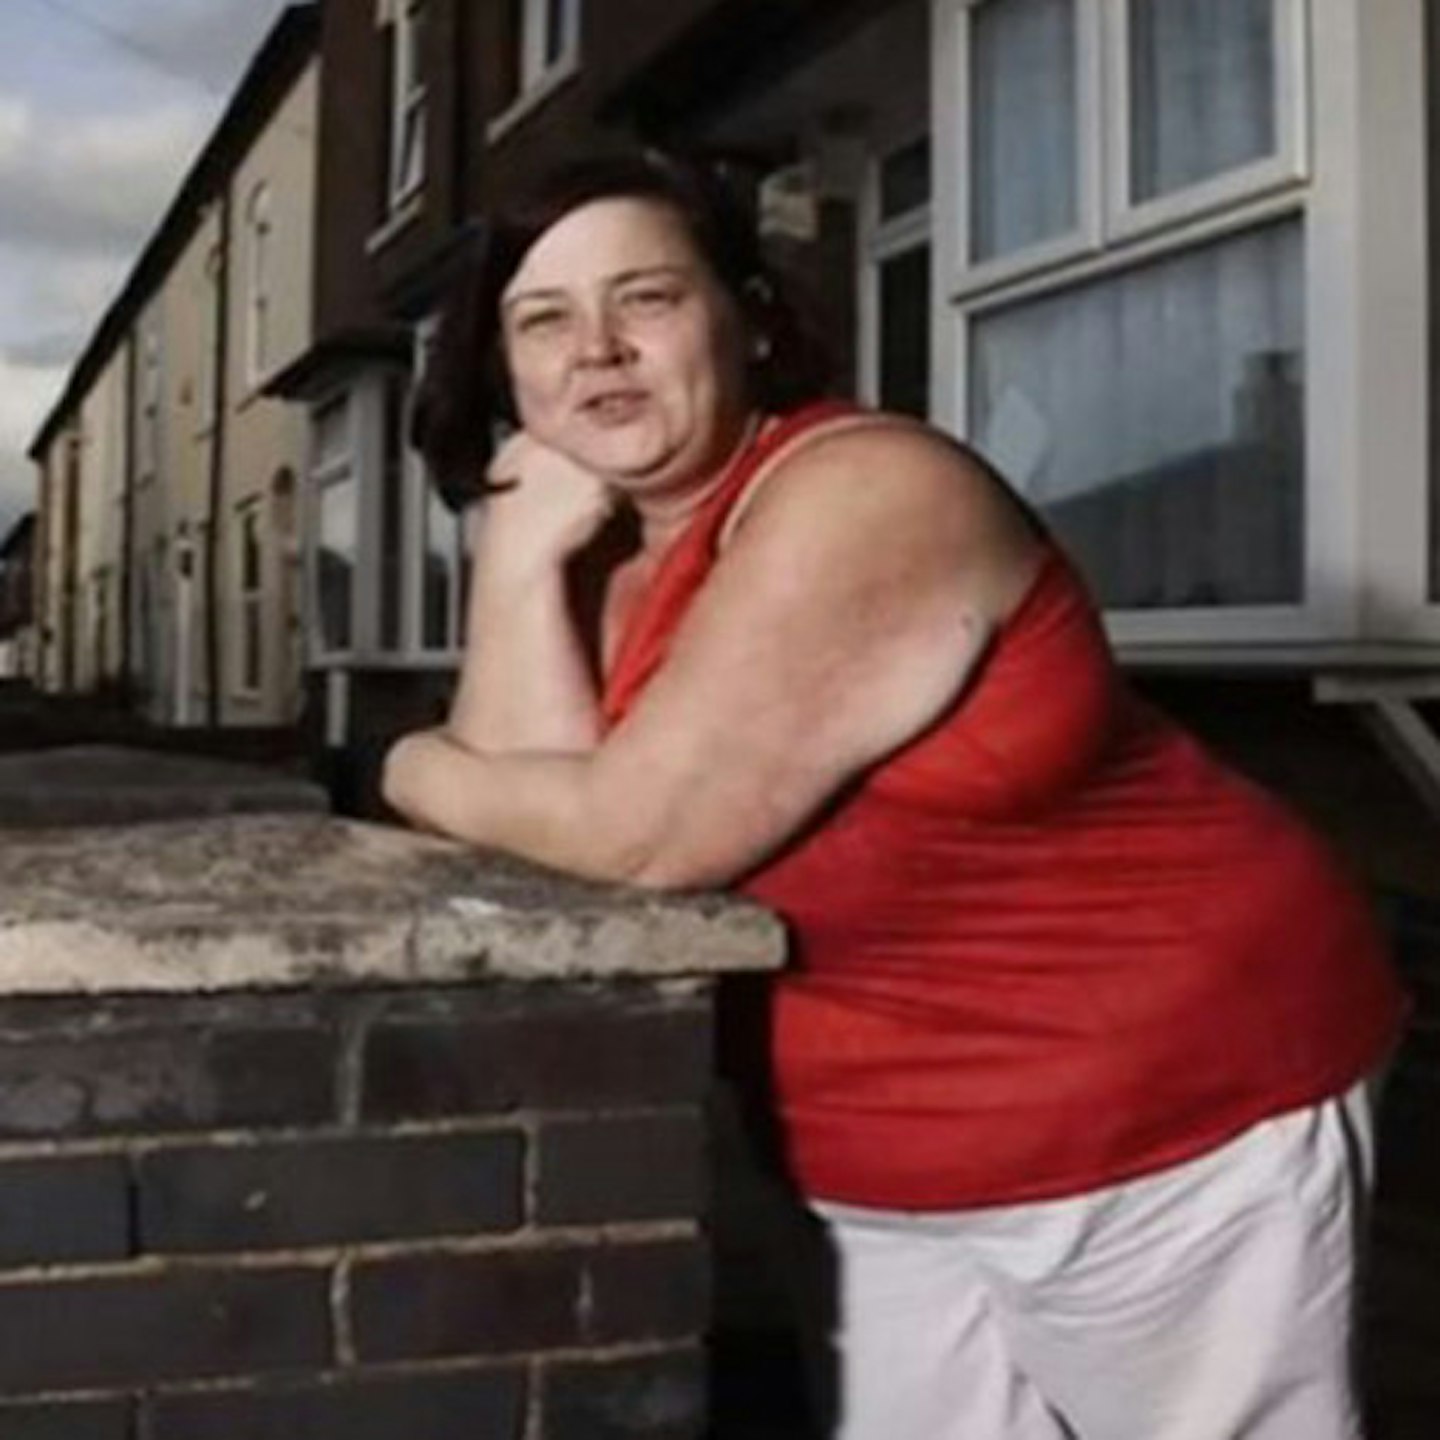 Dee insists she is doing nothing wrong in earning while claiming benefits